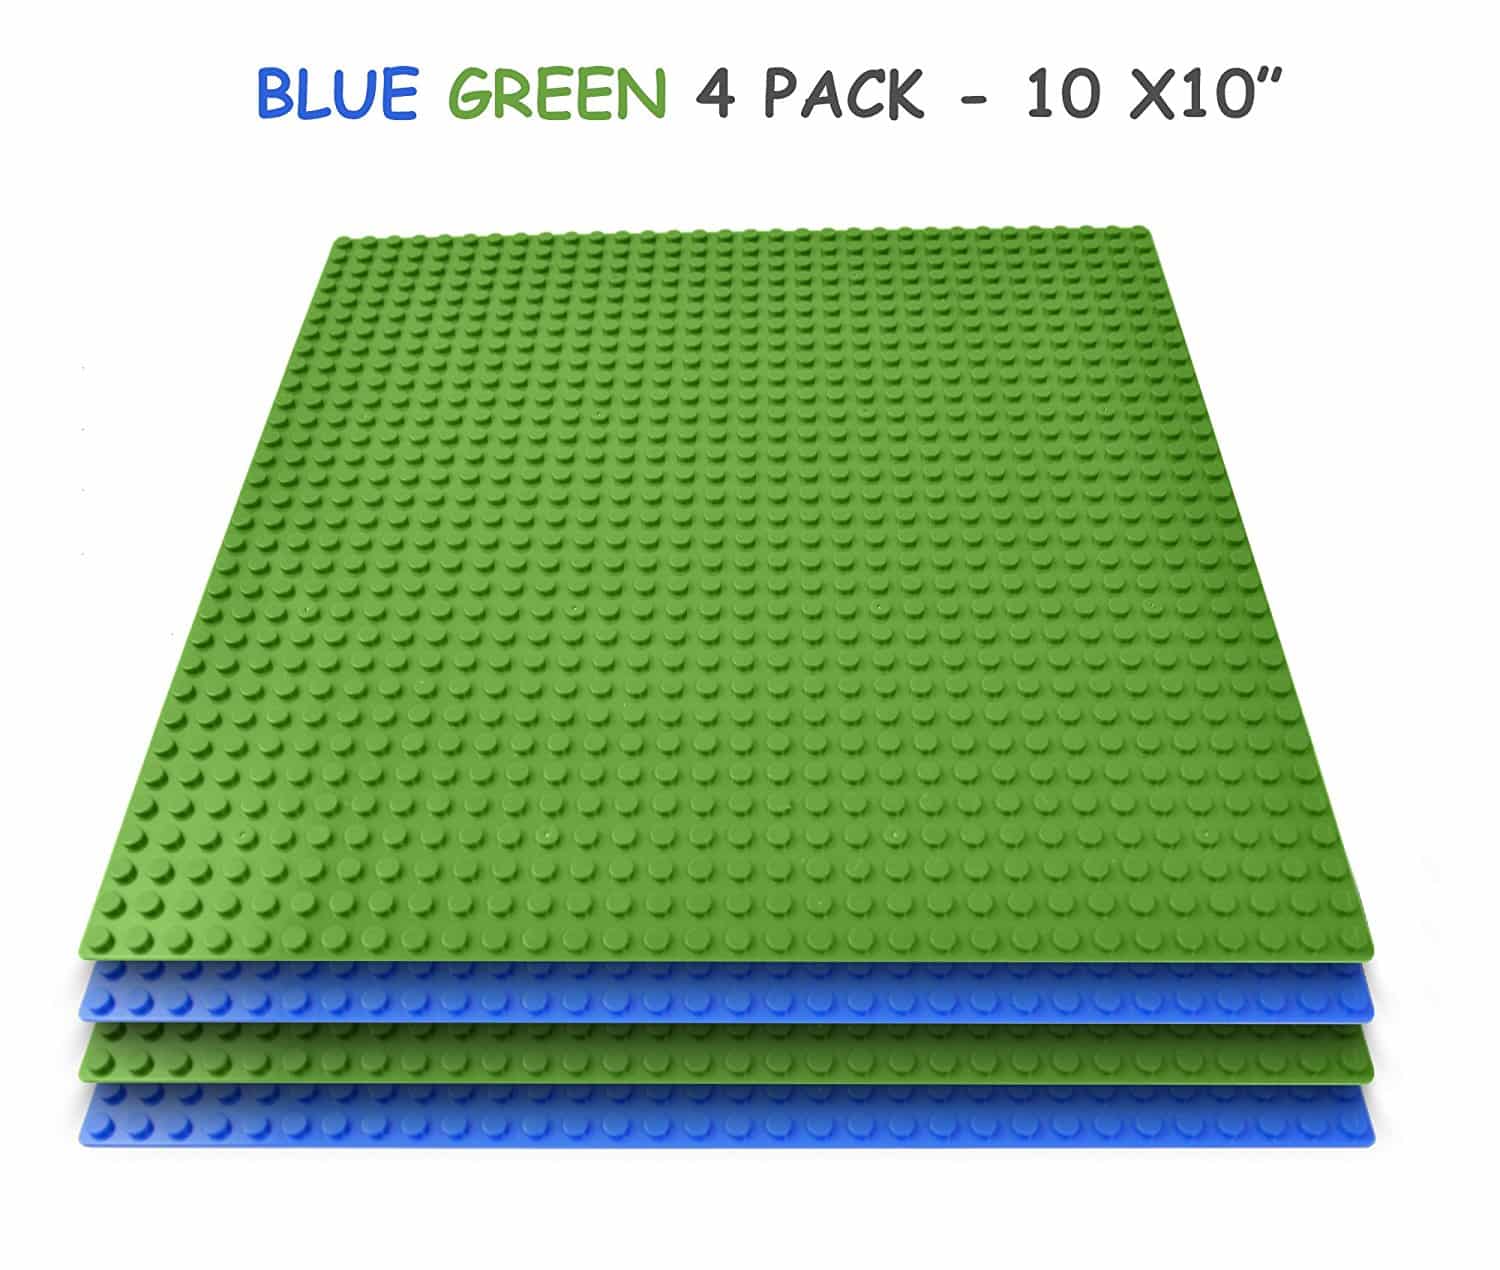 LIGHTNING DEAL ALERT! Lego Compatible Baseplates (4 pieces of 10″ x 10″) – 37% off!